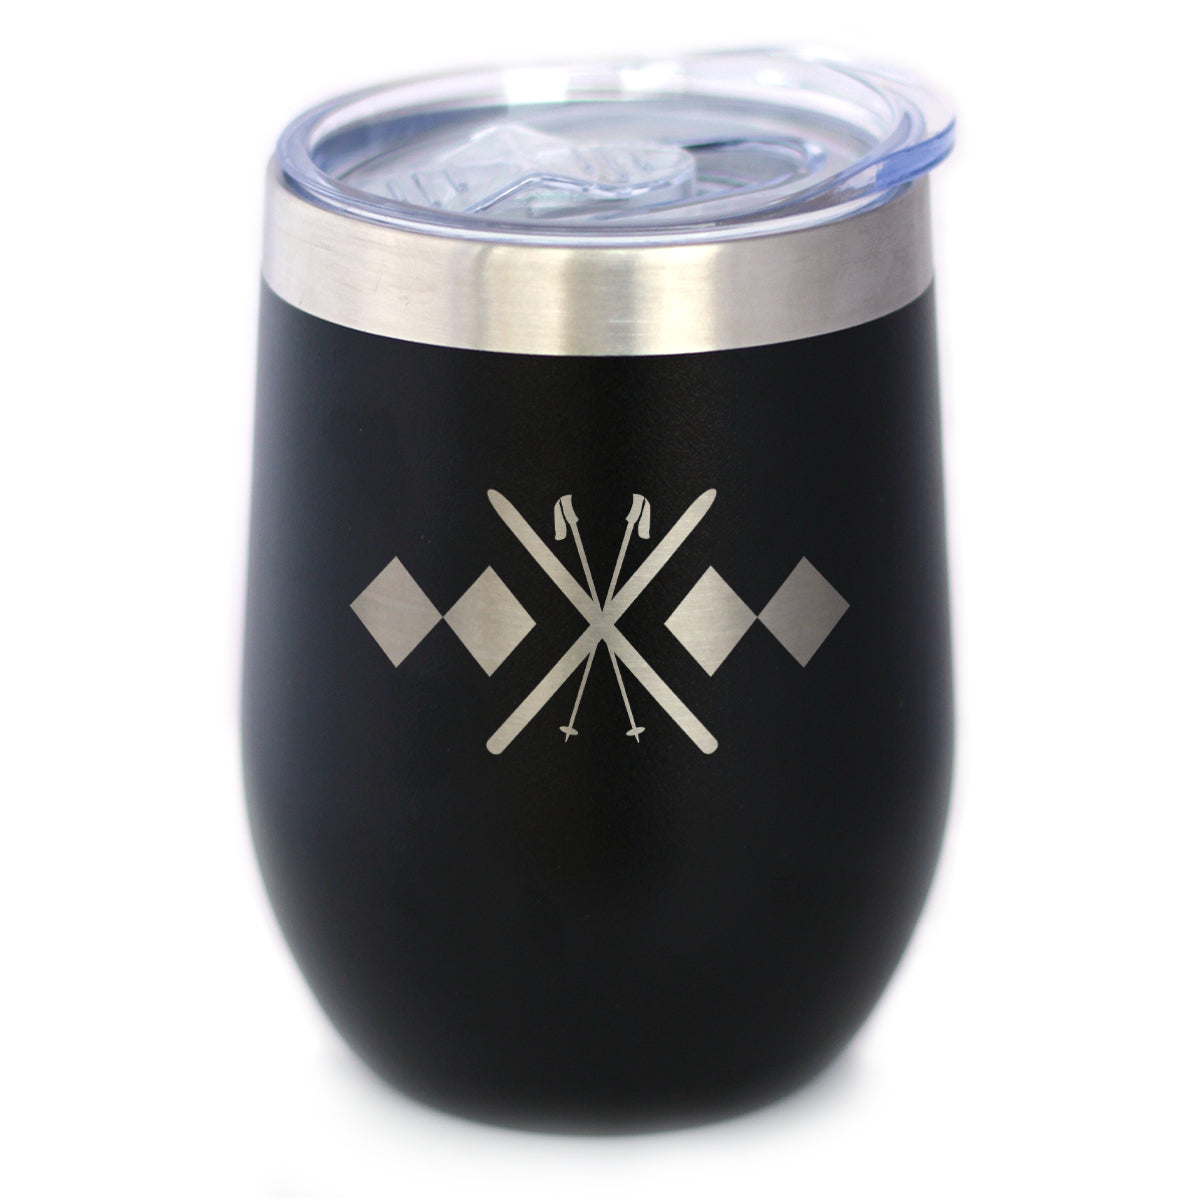 Double Black Diamond - Wine Tumbler Glass with Sliding Lid - Stainless Steel Travel Mug - Fun Skiing Gifts and Decor for Skiers